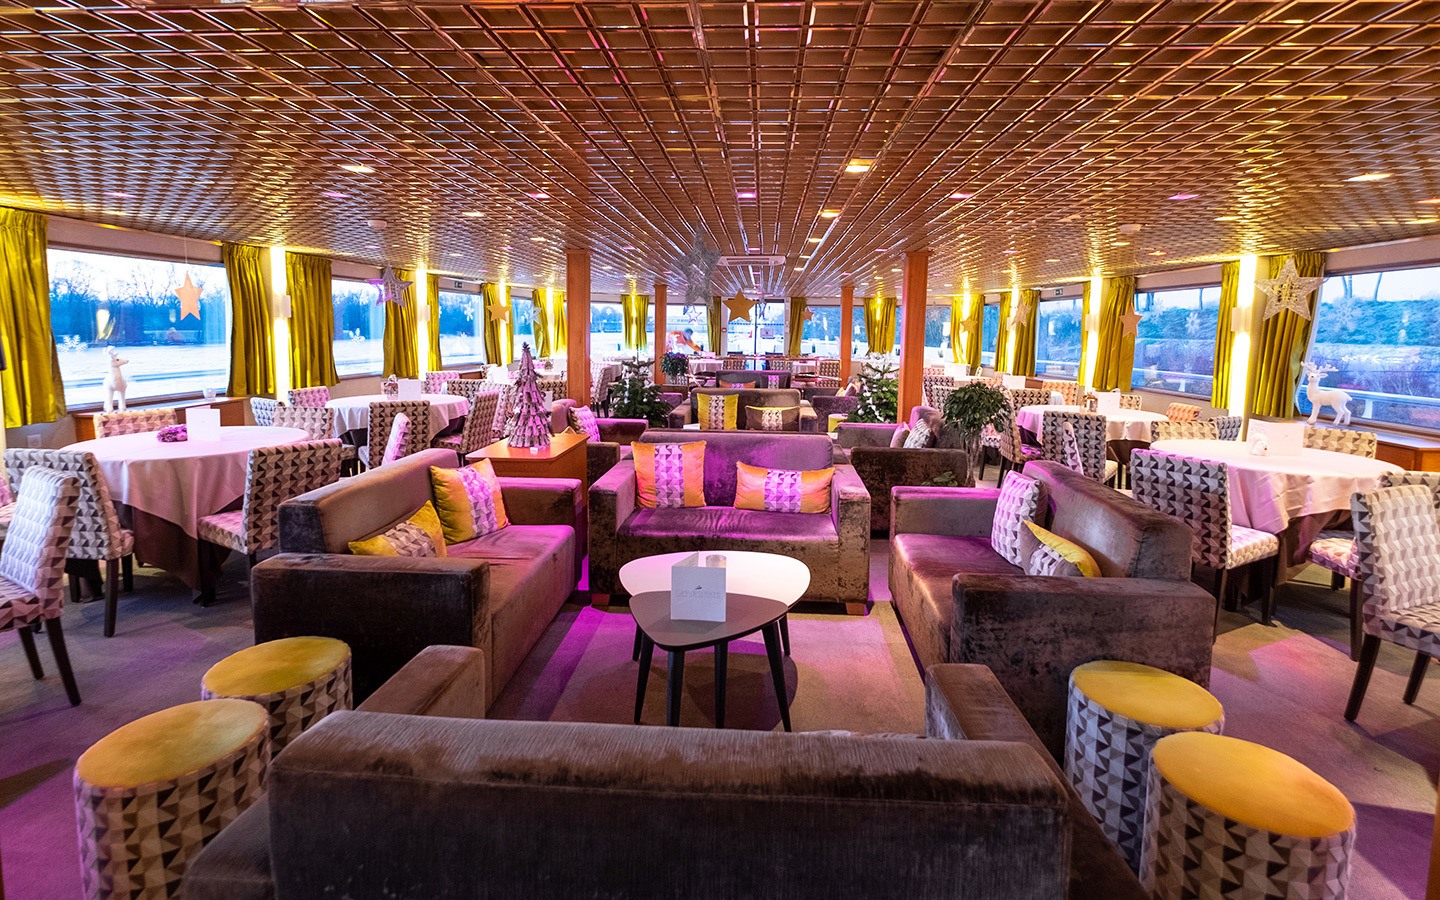 Lounge on the CroisiEurope river cruise ship MS France